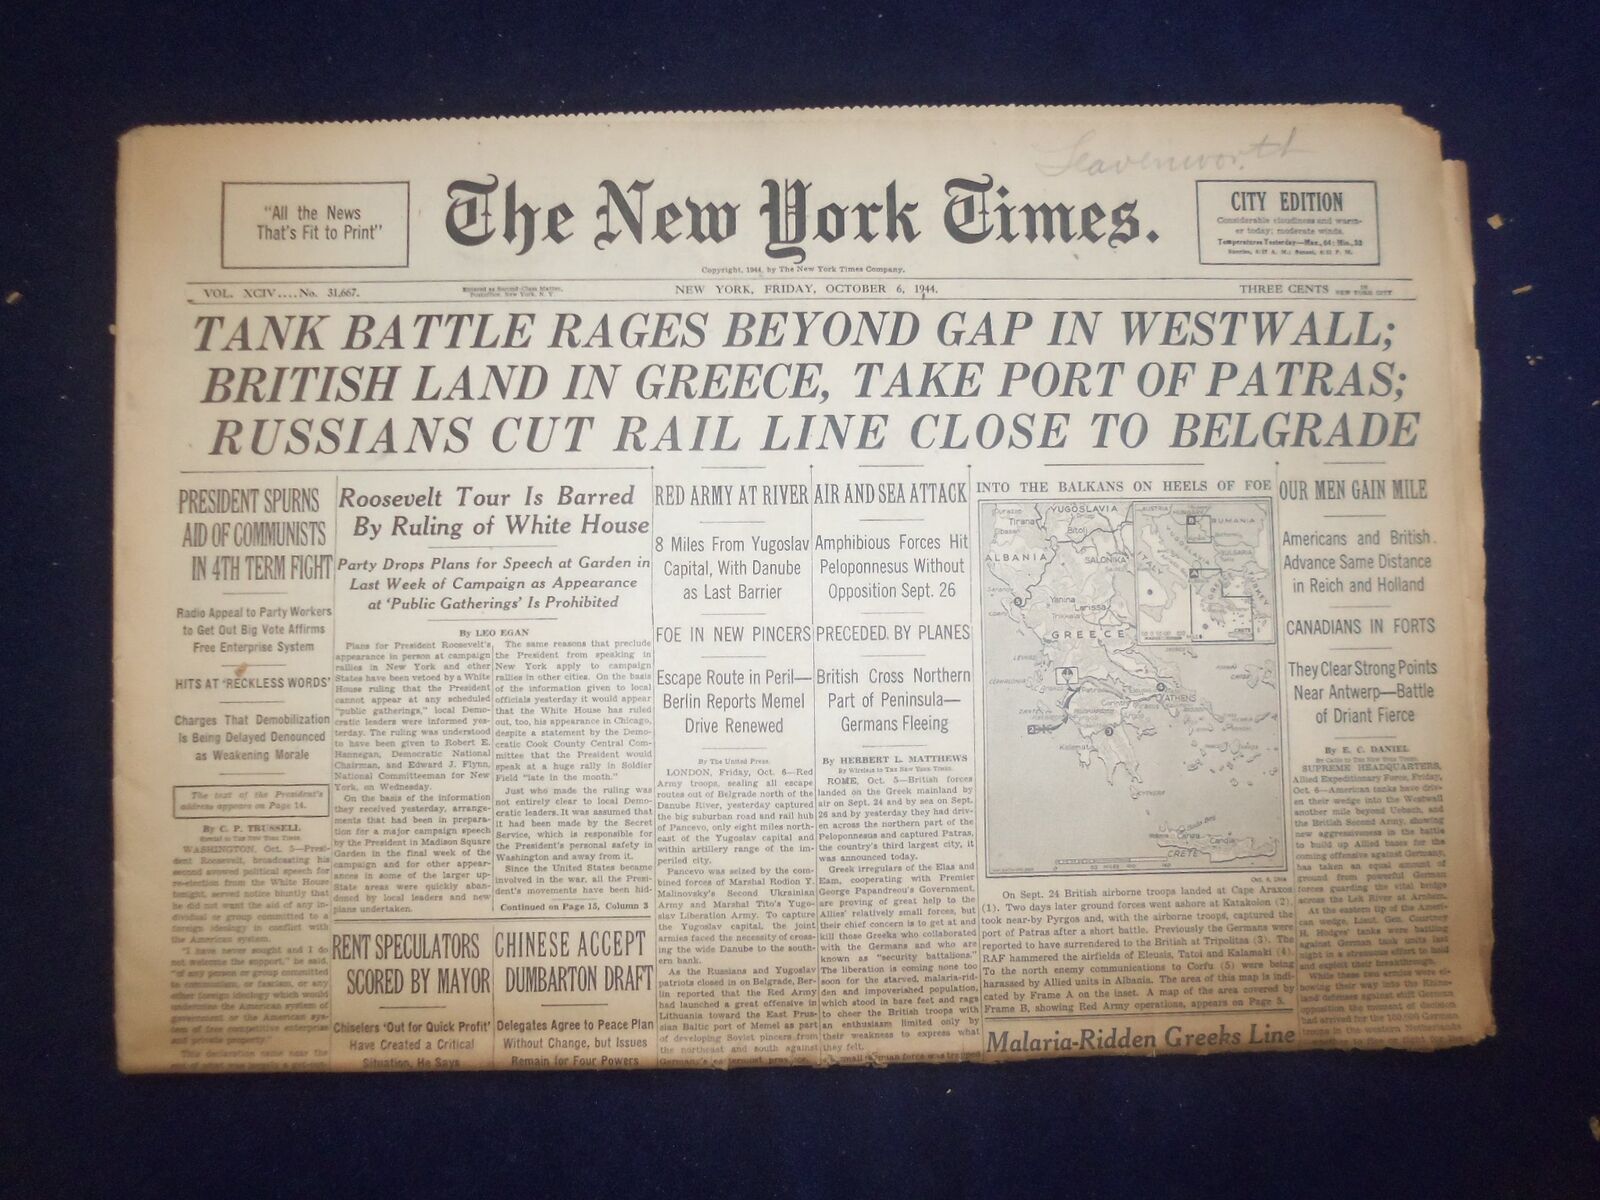 1944 OCT 6 NEW YORK TIMES - TANK BATTLE RAGES BEYOND GAP IN WESTWALL - NP 6634